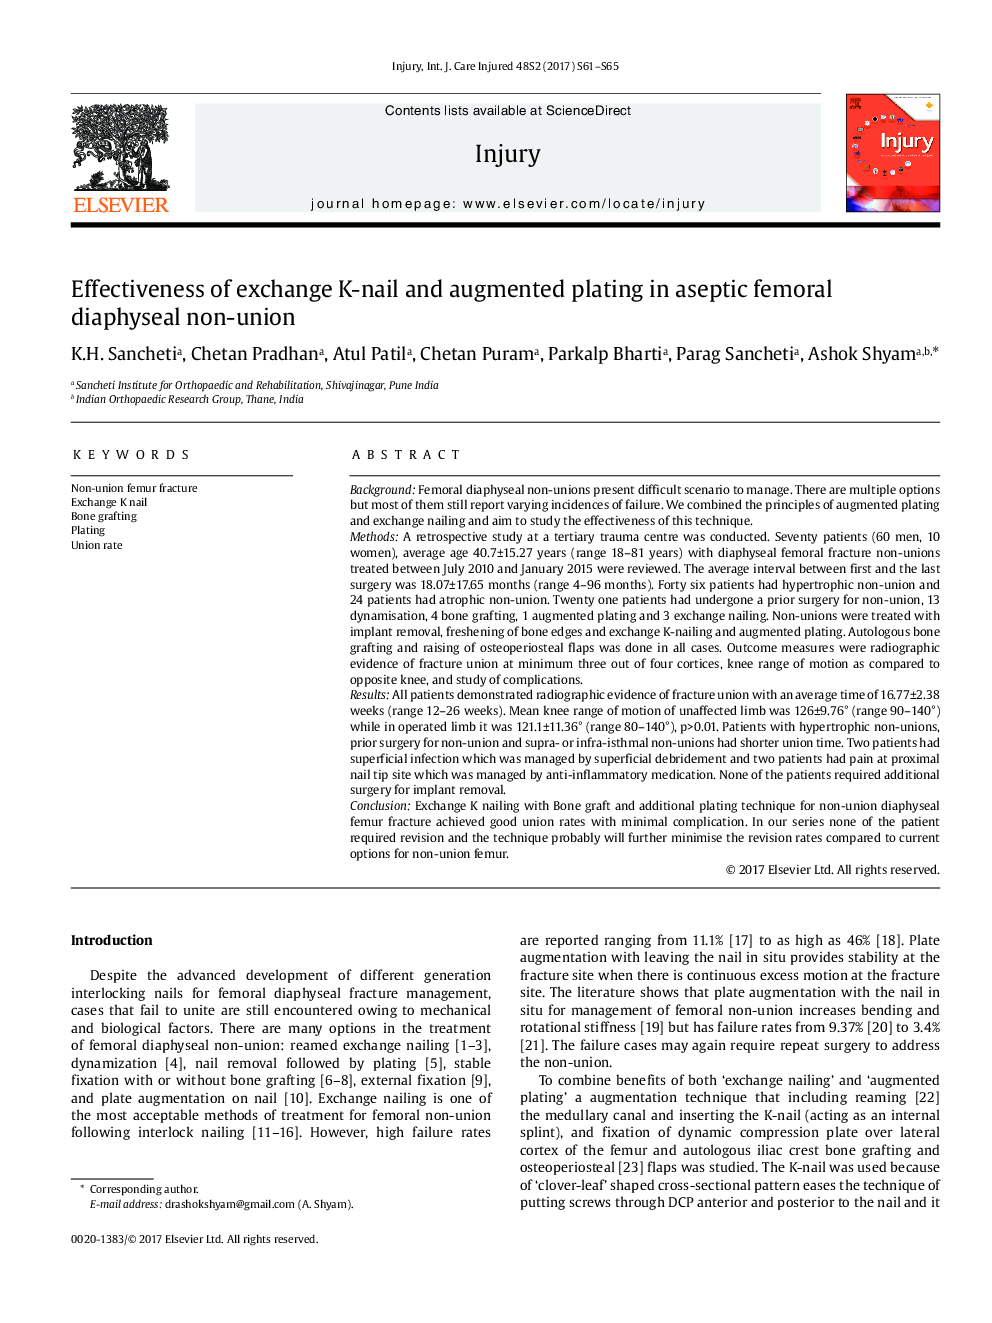 Effectiveness of exchange K-nail and augmented plating in aseptic femoral diaphyseal non-union